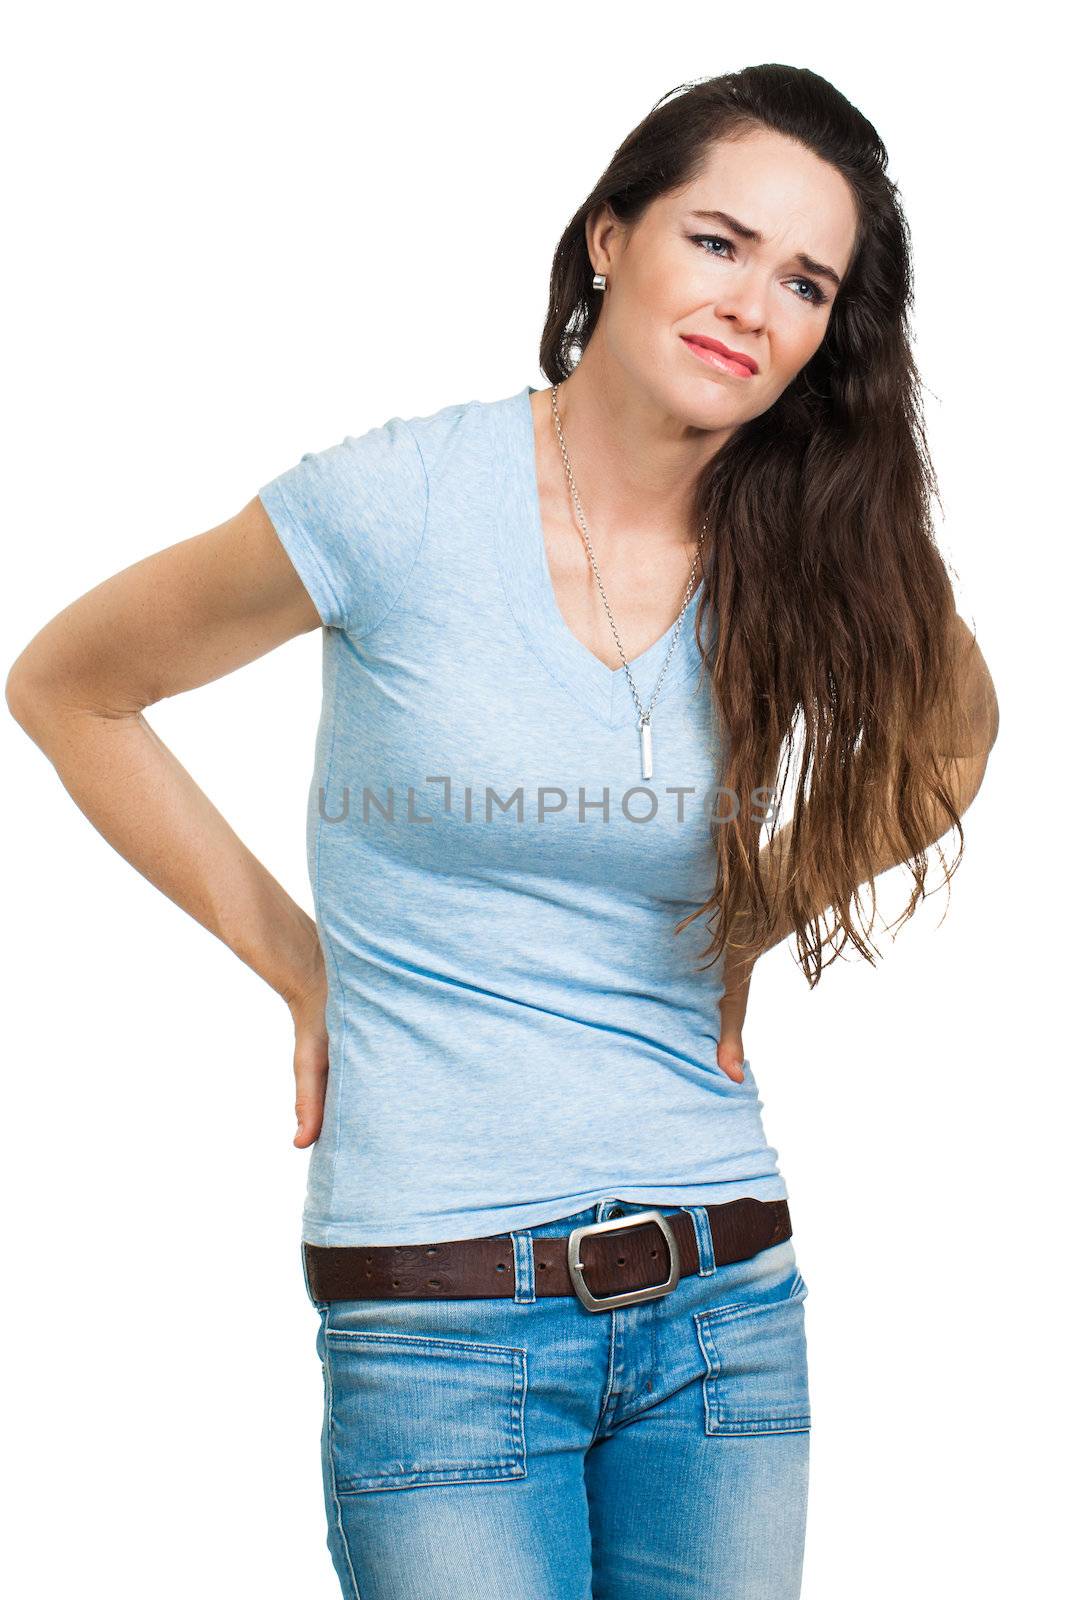 A woman suffering from lower back pain. Isolated on white.